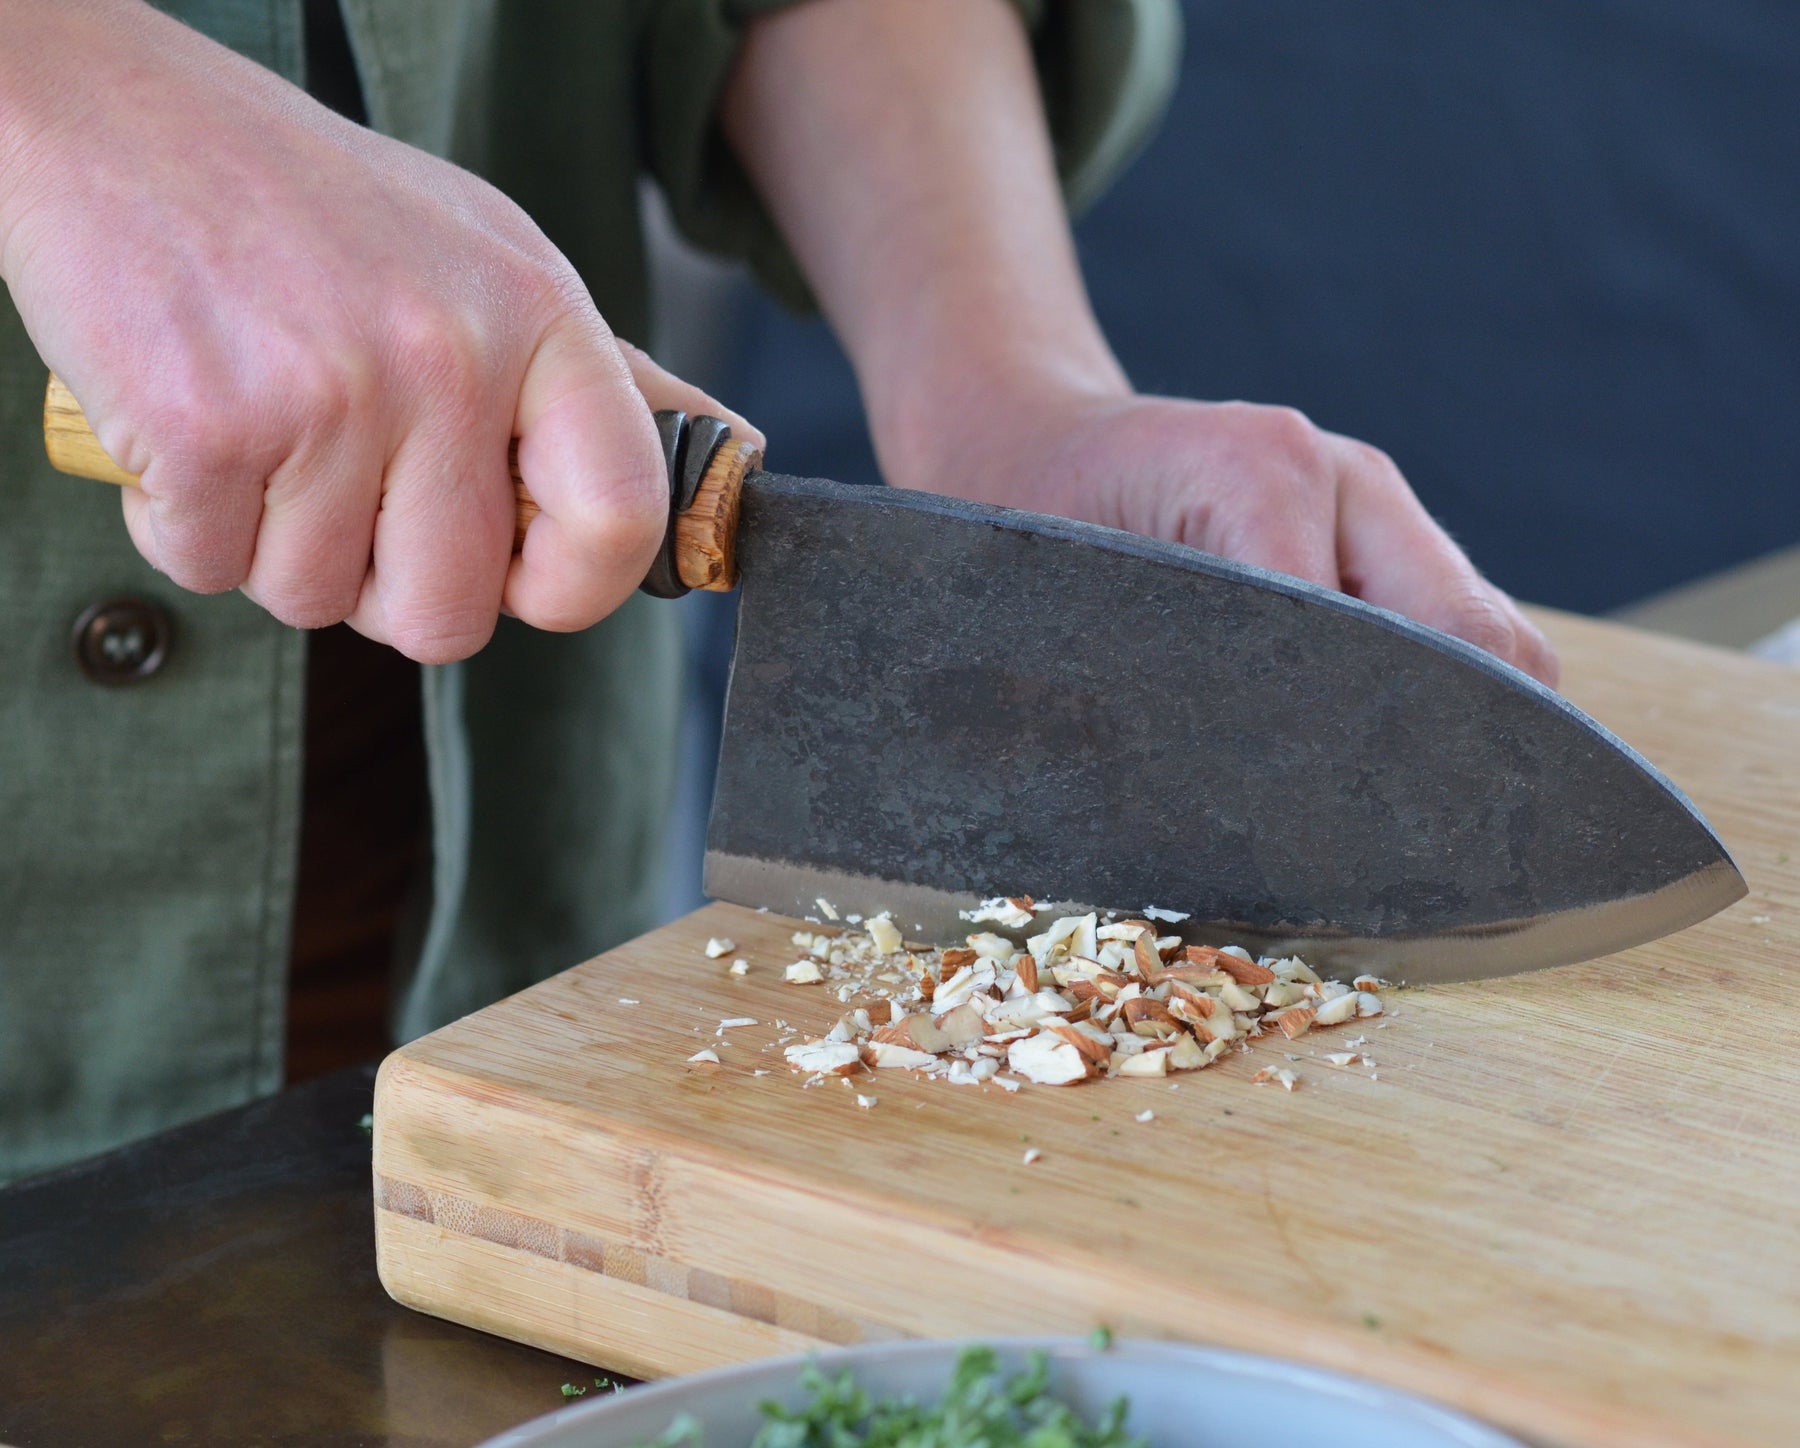 Master Shin's Anvil Chef Knife - Large – Studio H Collection